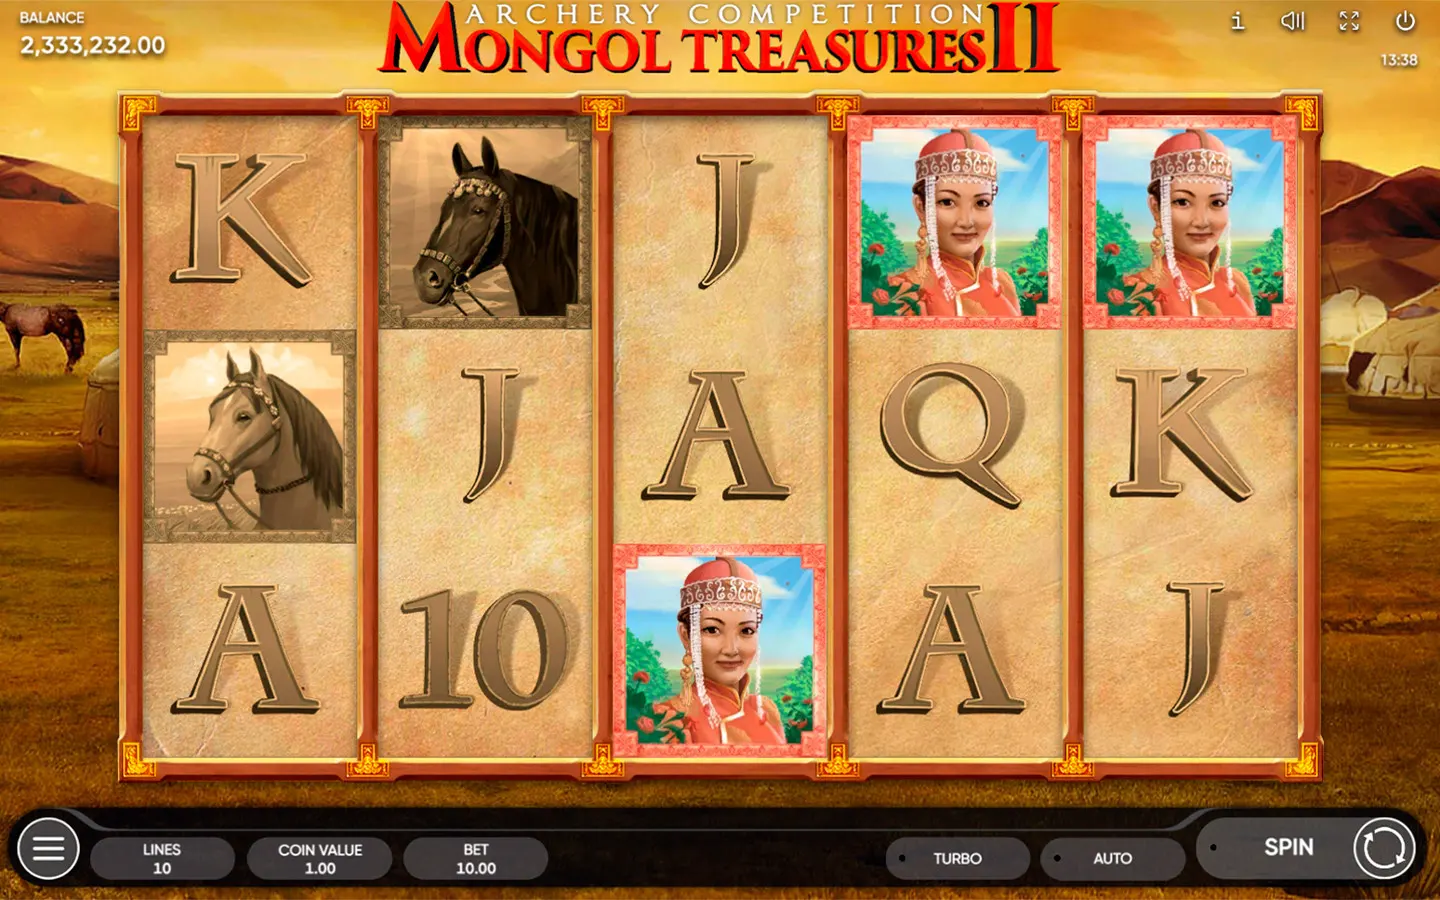 Mongol Treasures II: Archery Competition Theme, Graphics, and Sounds